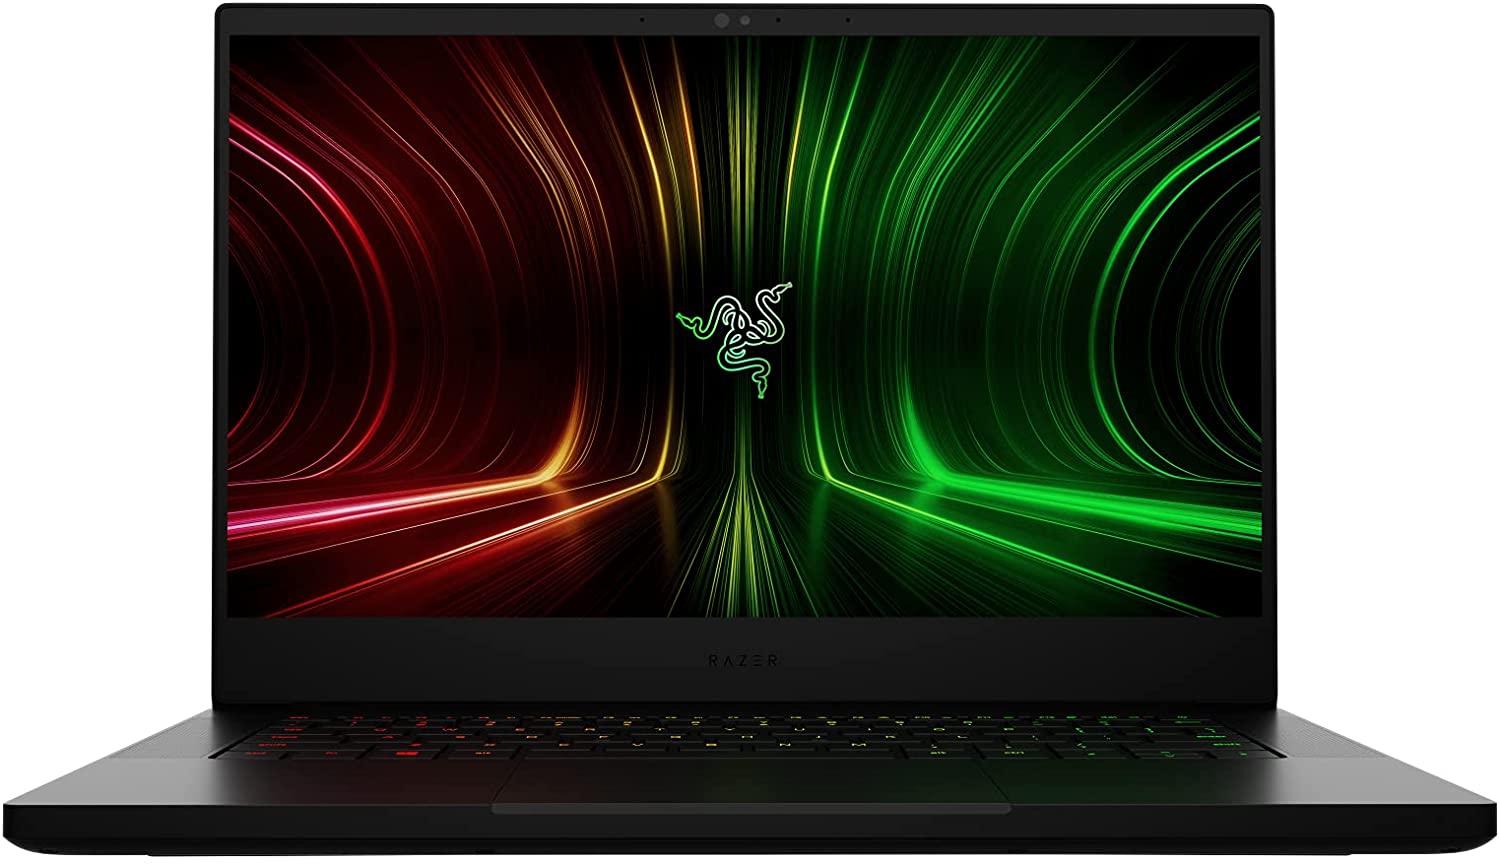 Review: The Razer Blade 14 is immensely powerful but has some quirks